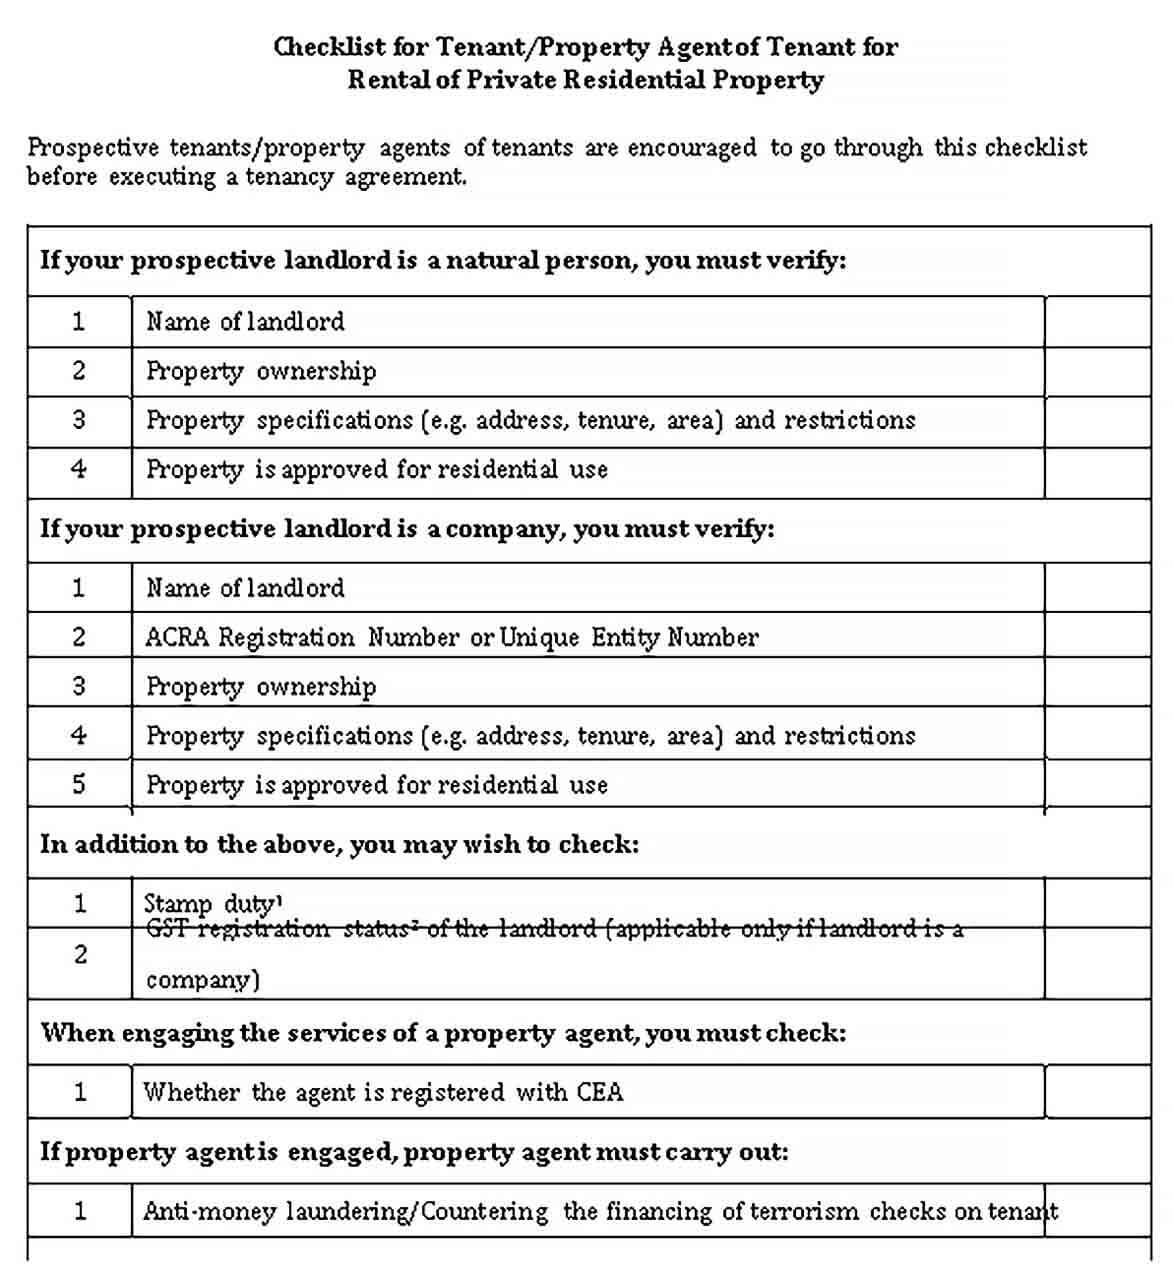 Sample Private Residential Landlord Tenant Checklist Template